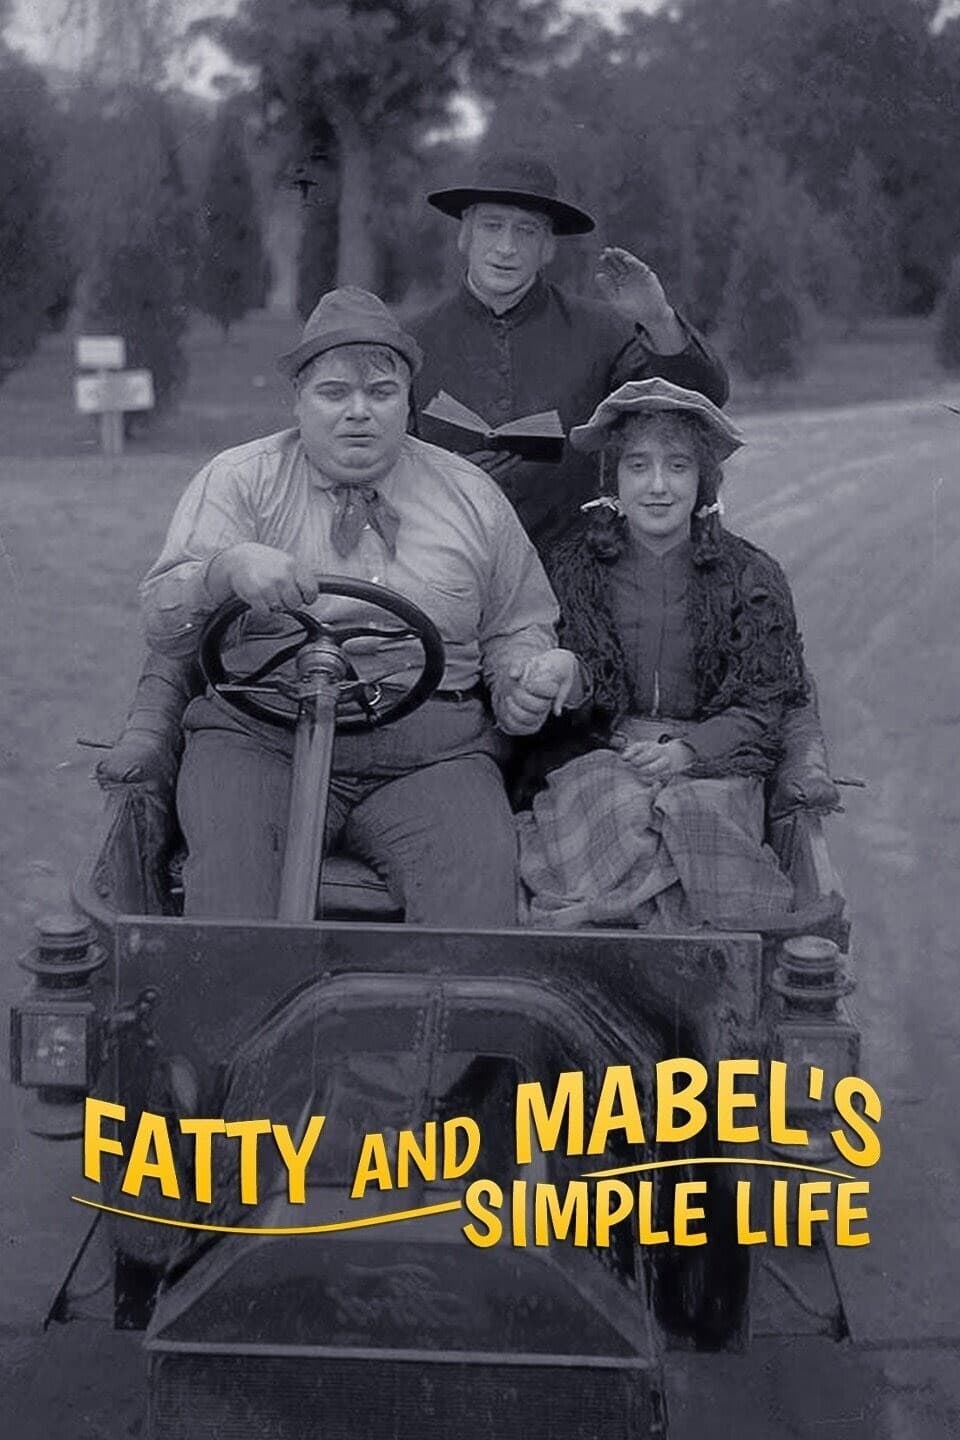 Fatty and Mabel’s Simple Life (1915)